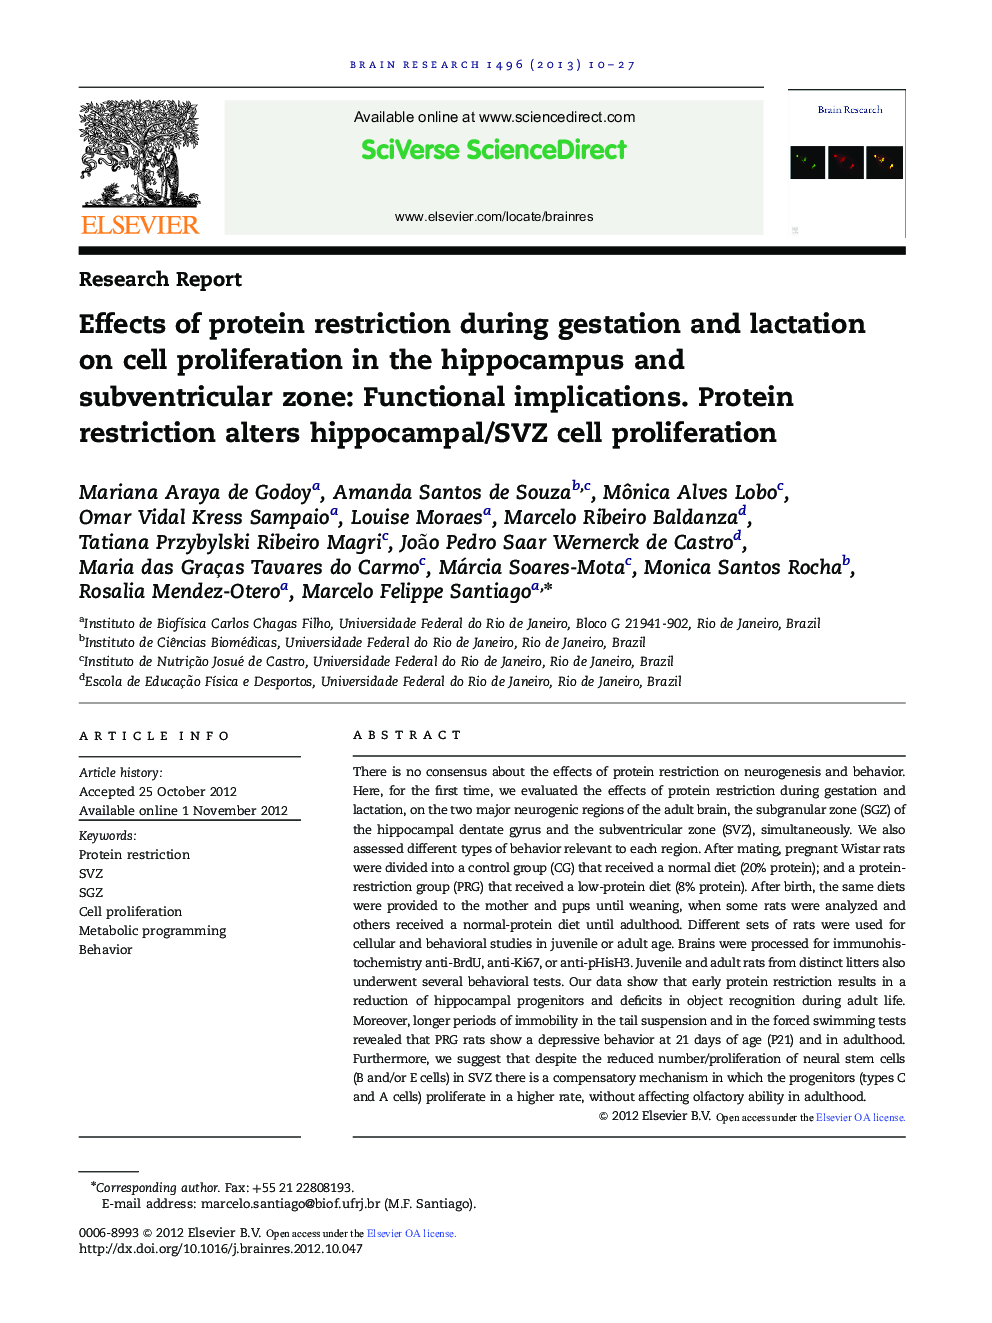 Research ReportEffects of protein restriction during gestation and lactation on cell proliferation in the hippocampus and subventricular zone: Functional implications. Protein restriction alters hippocampal/SVZ cell proliferation